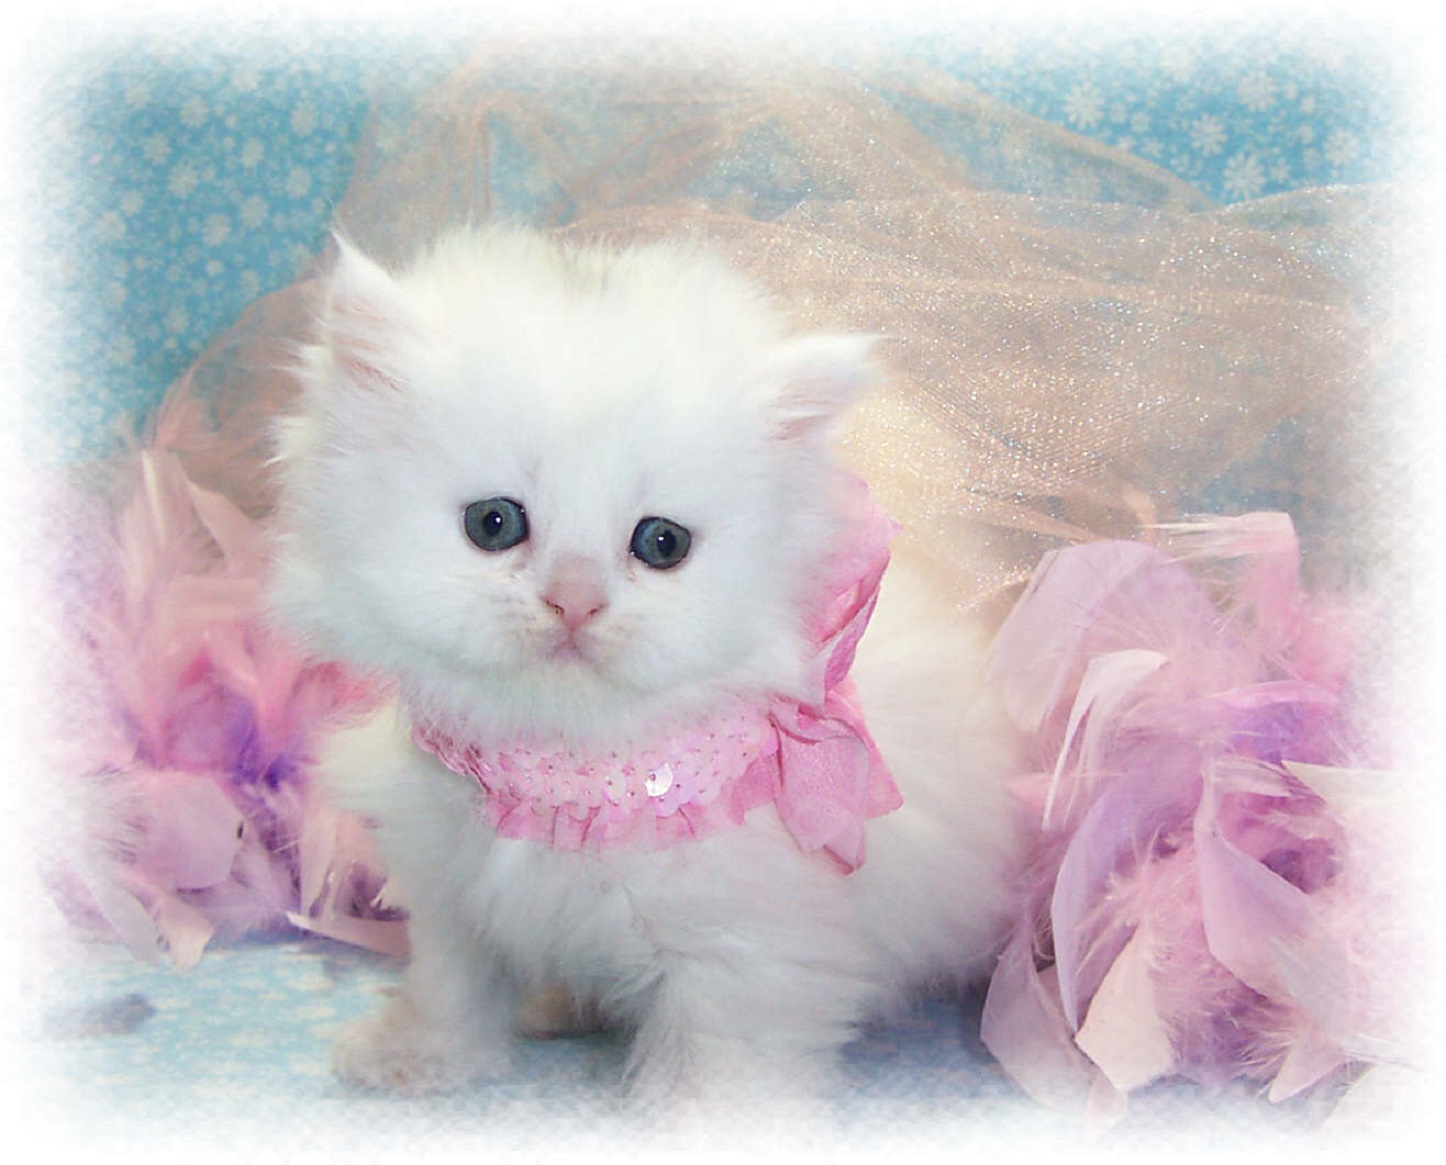 Beautiful Kittens & Cute Cat Images & Wallpapers Free Download